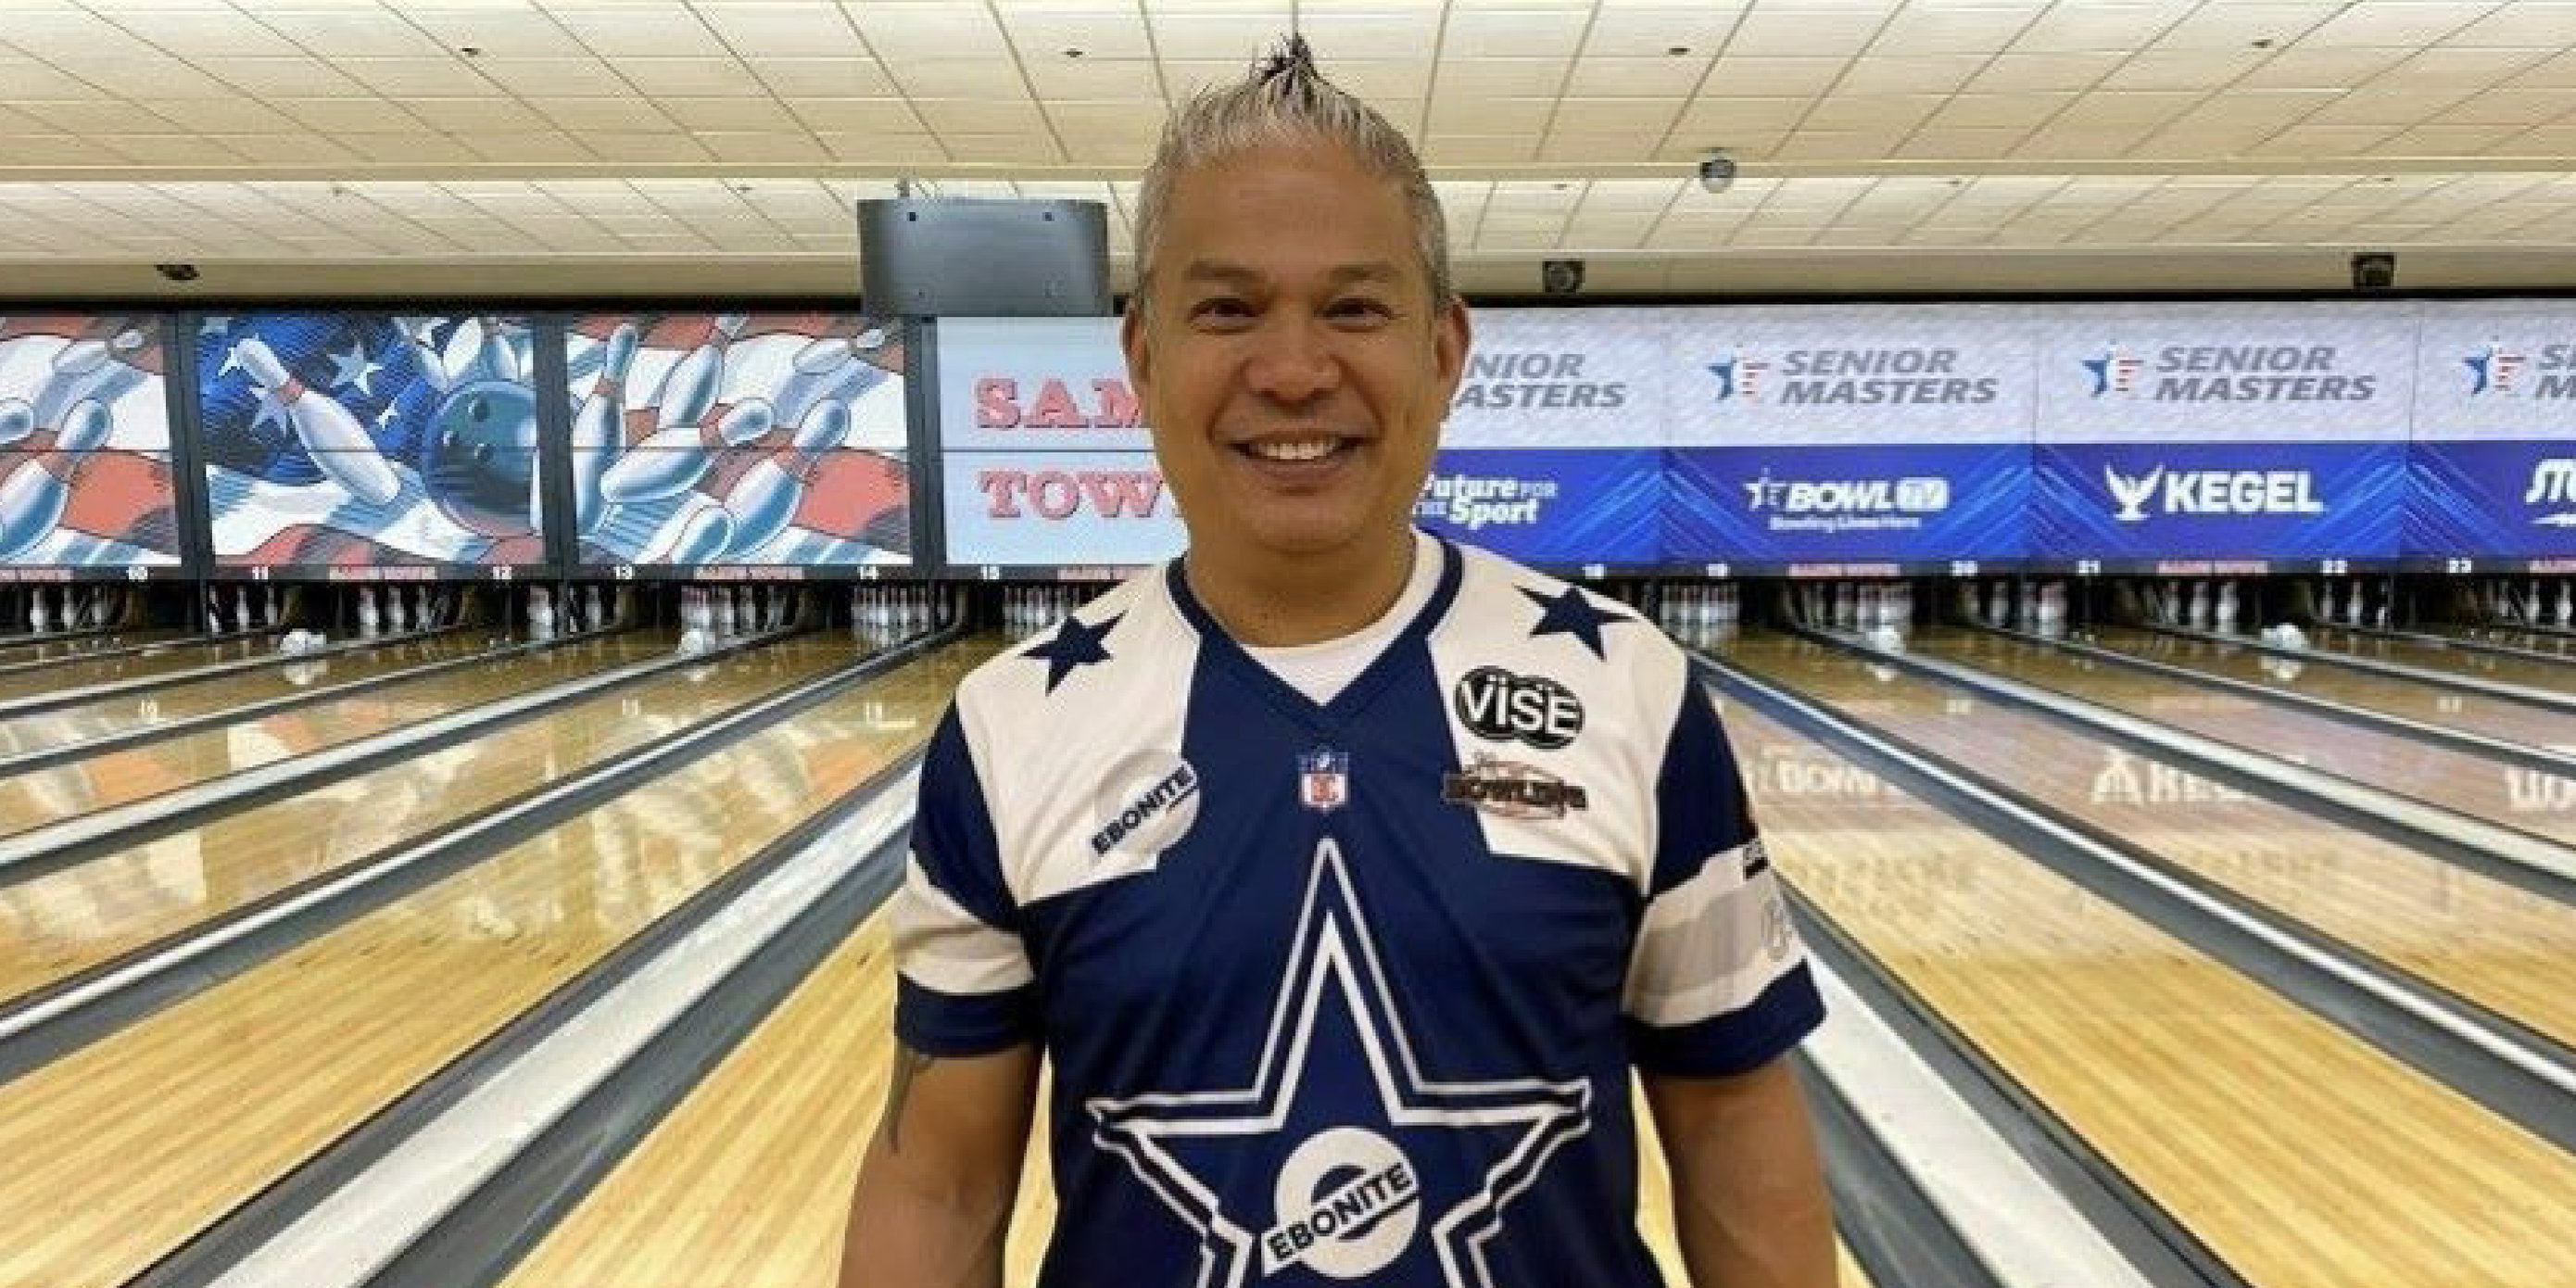 Defending champion Castillo leads after first round at 2023 USBC Senior